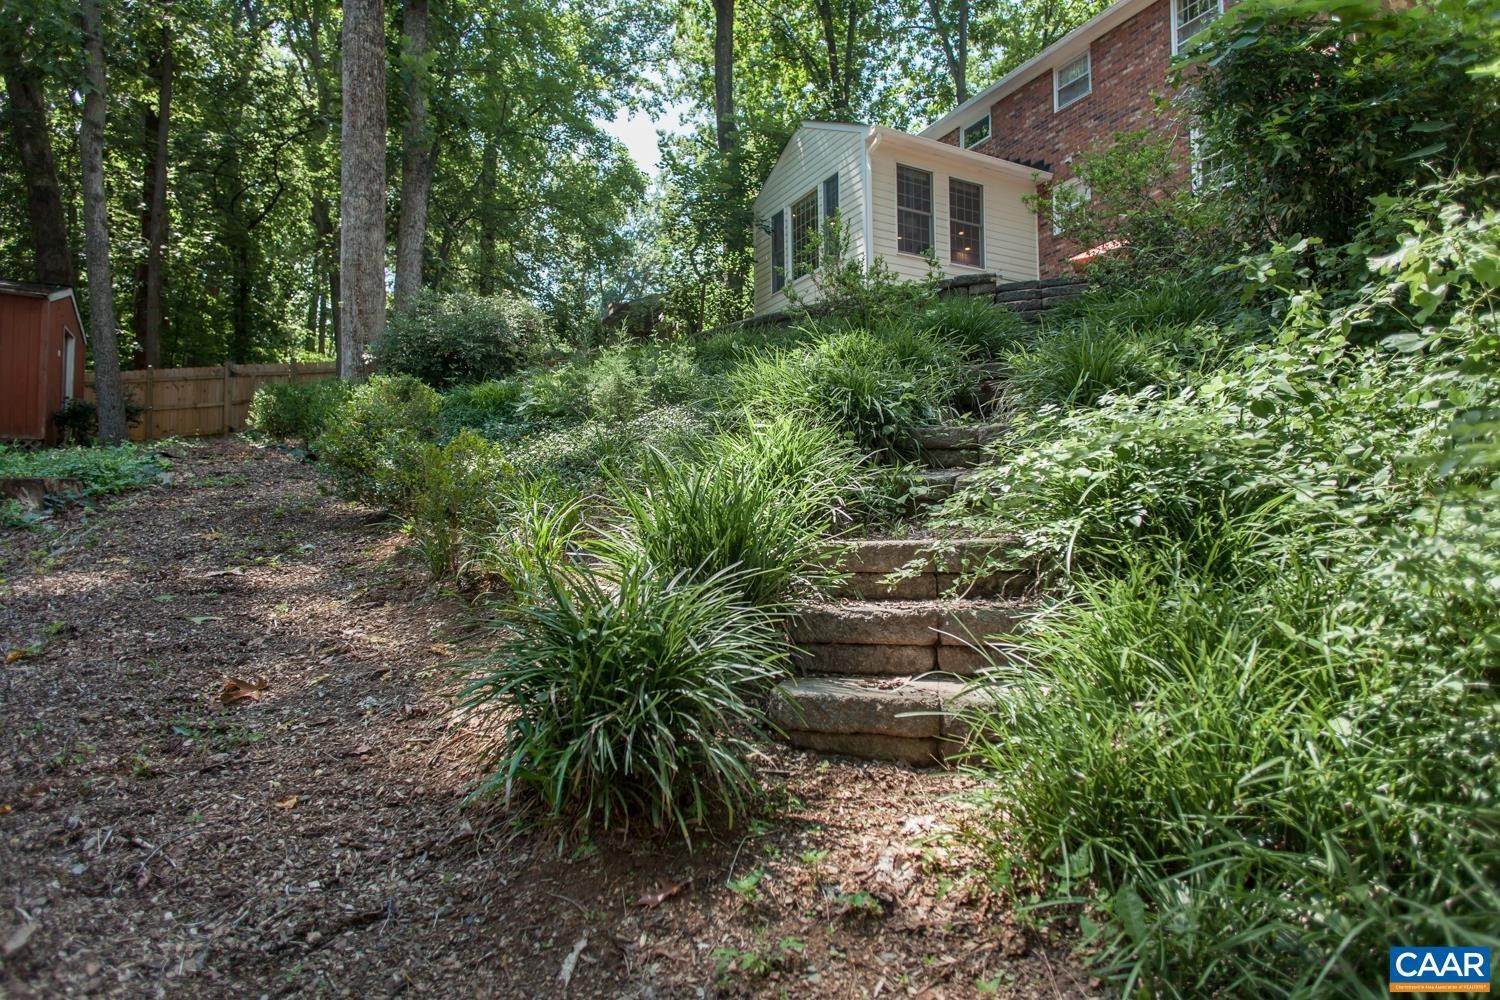 46. Single Family Homes for Sale at 106 KERRY Lane Charlottesville, Virginia 22901 United States